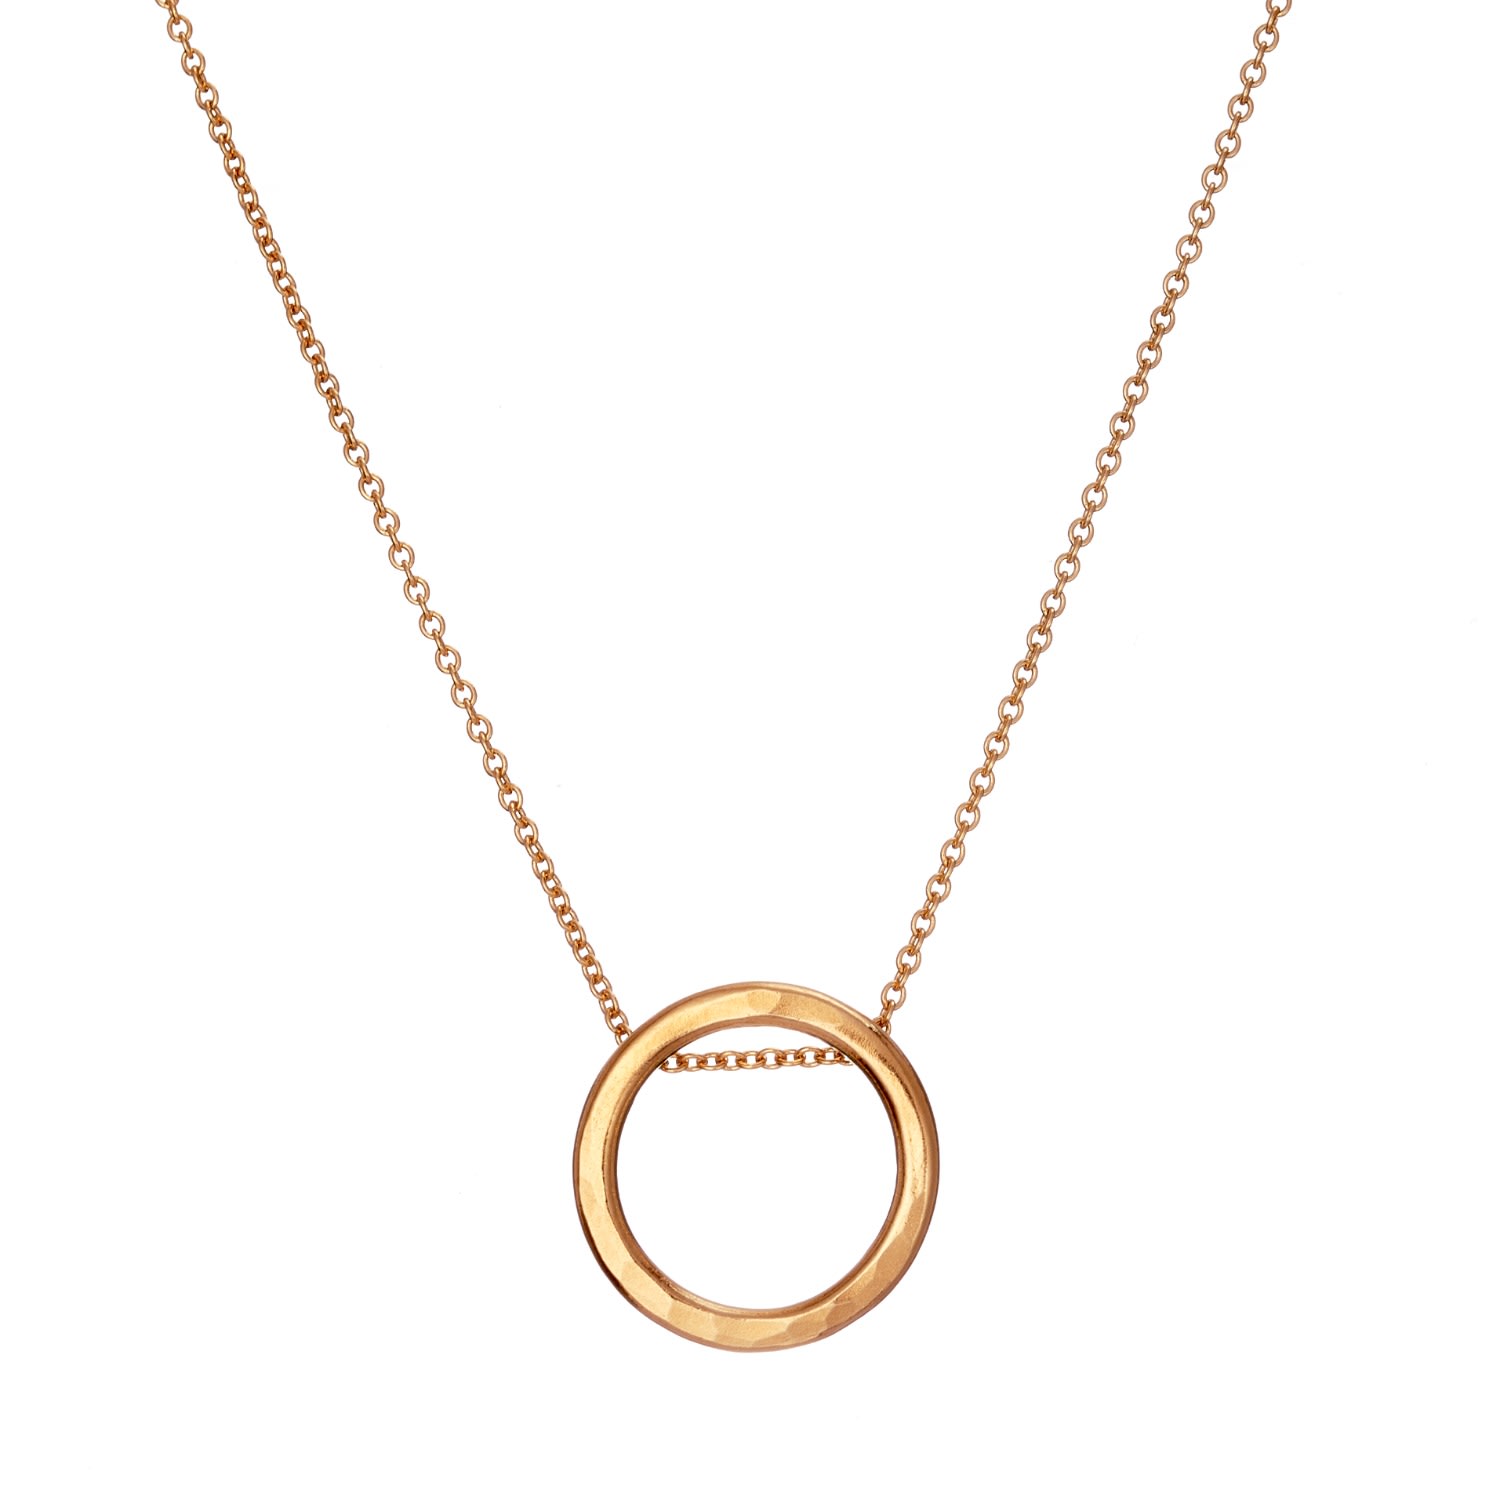 Women’s Yellow Gold Plated Medium Hoop Necklace Posh Totty Designs